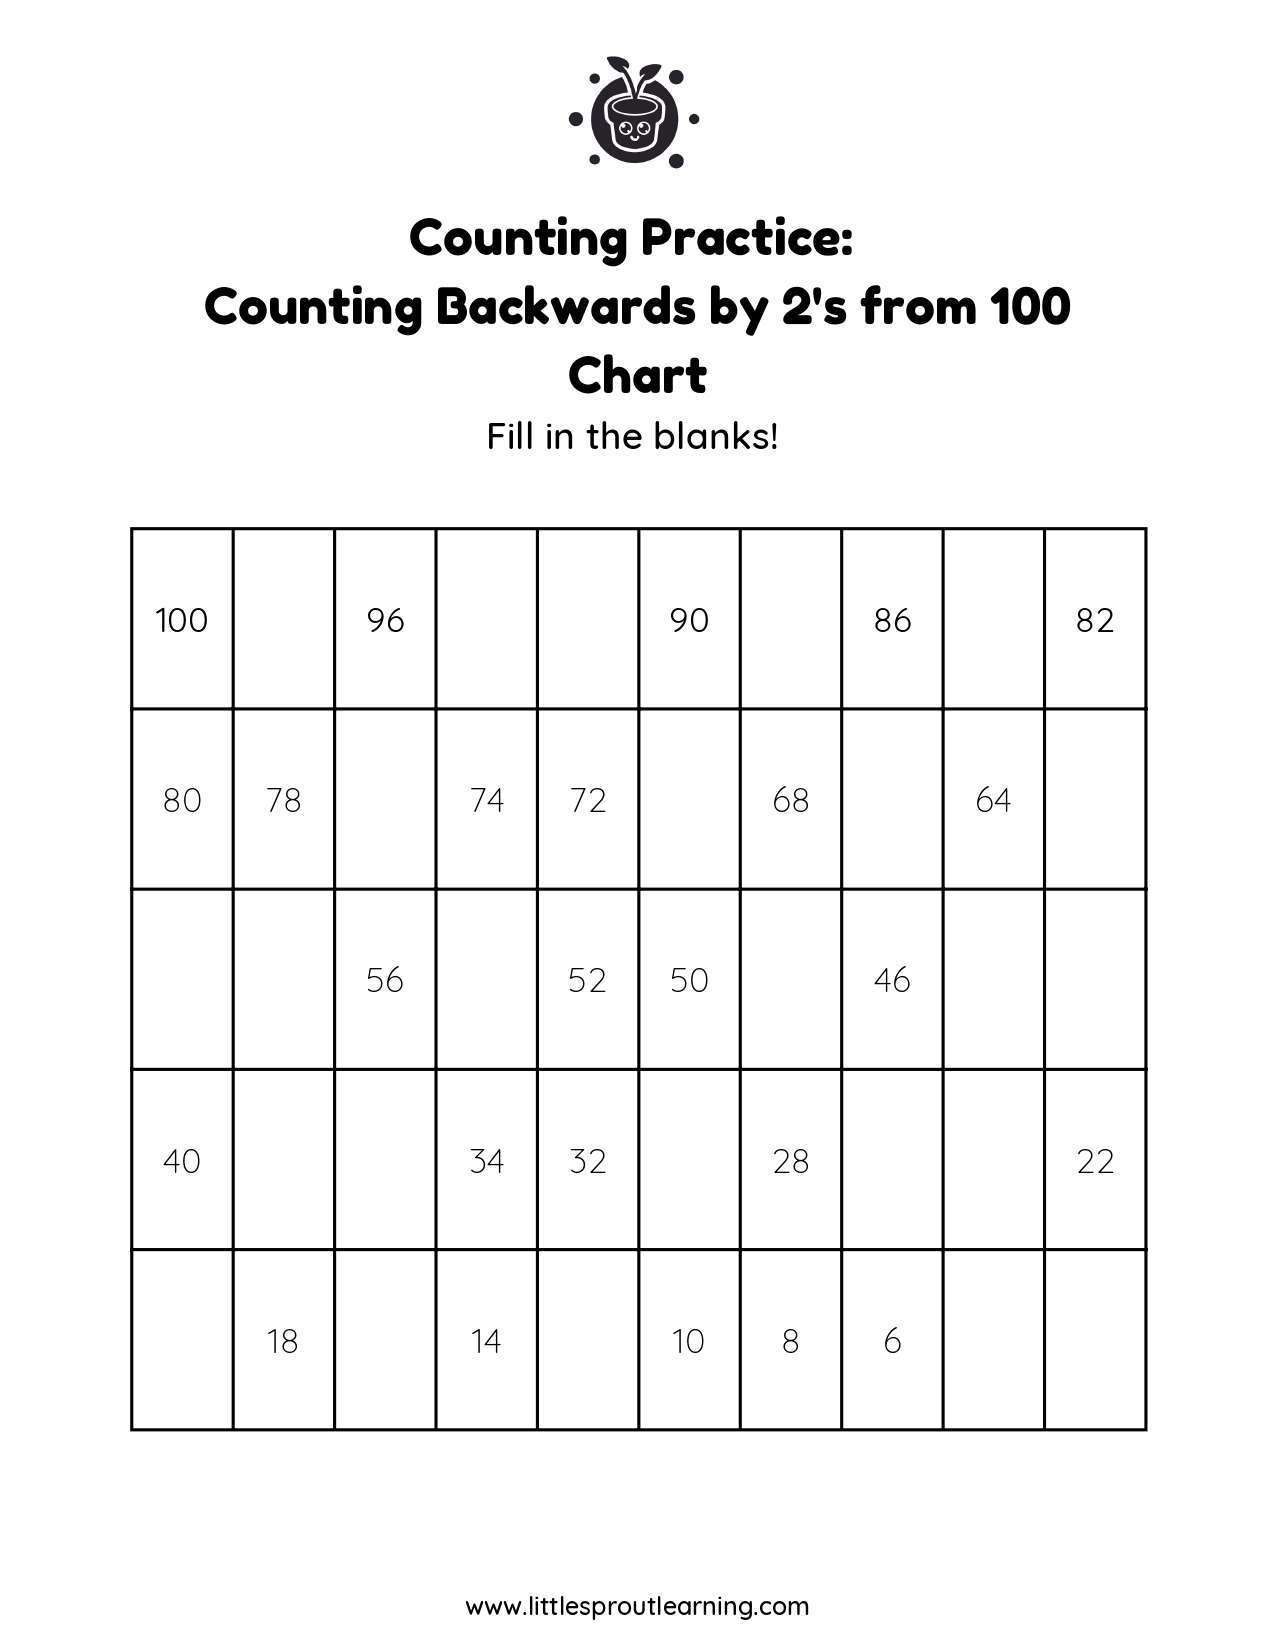 Counting Backwards by 2’s From 100 – Fill In the Blanks